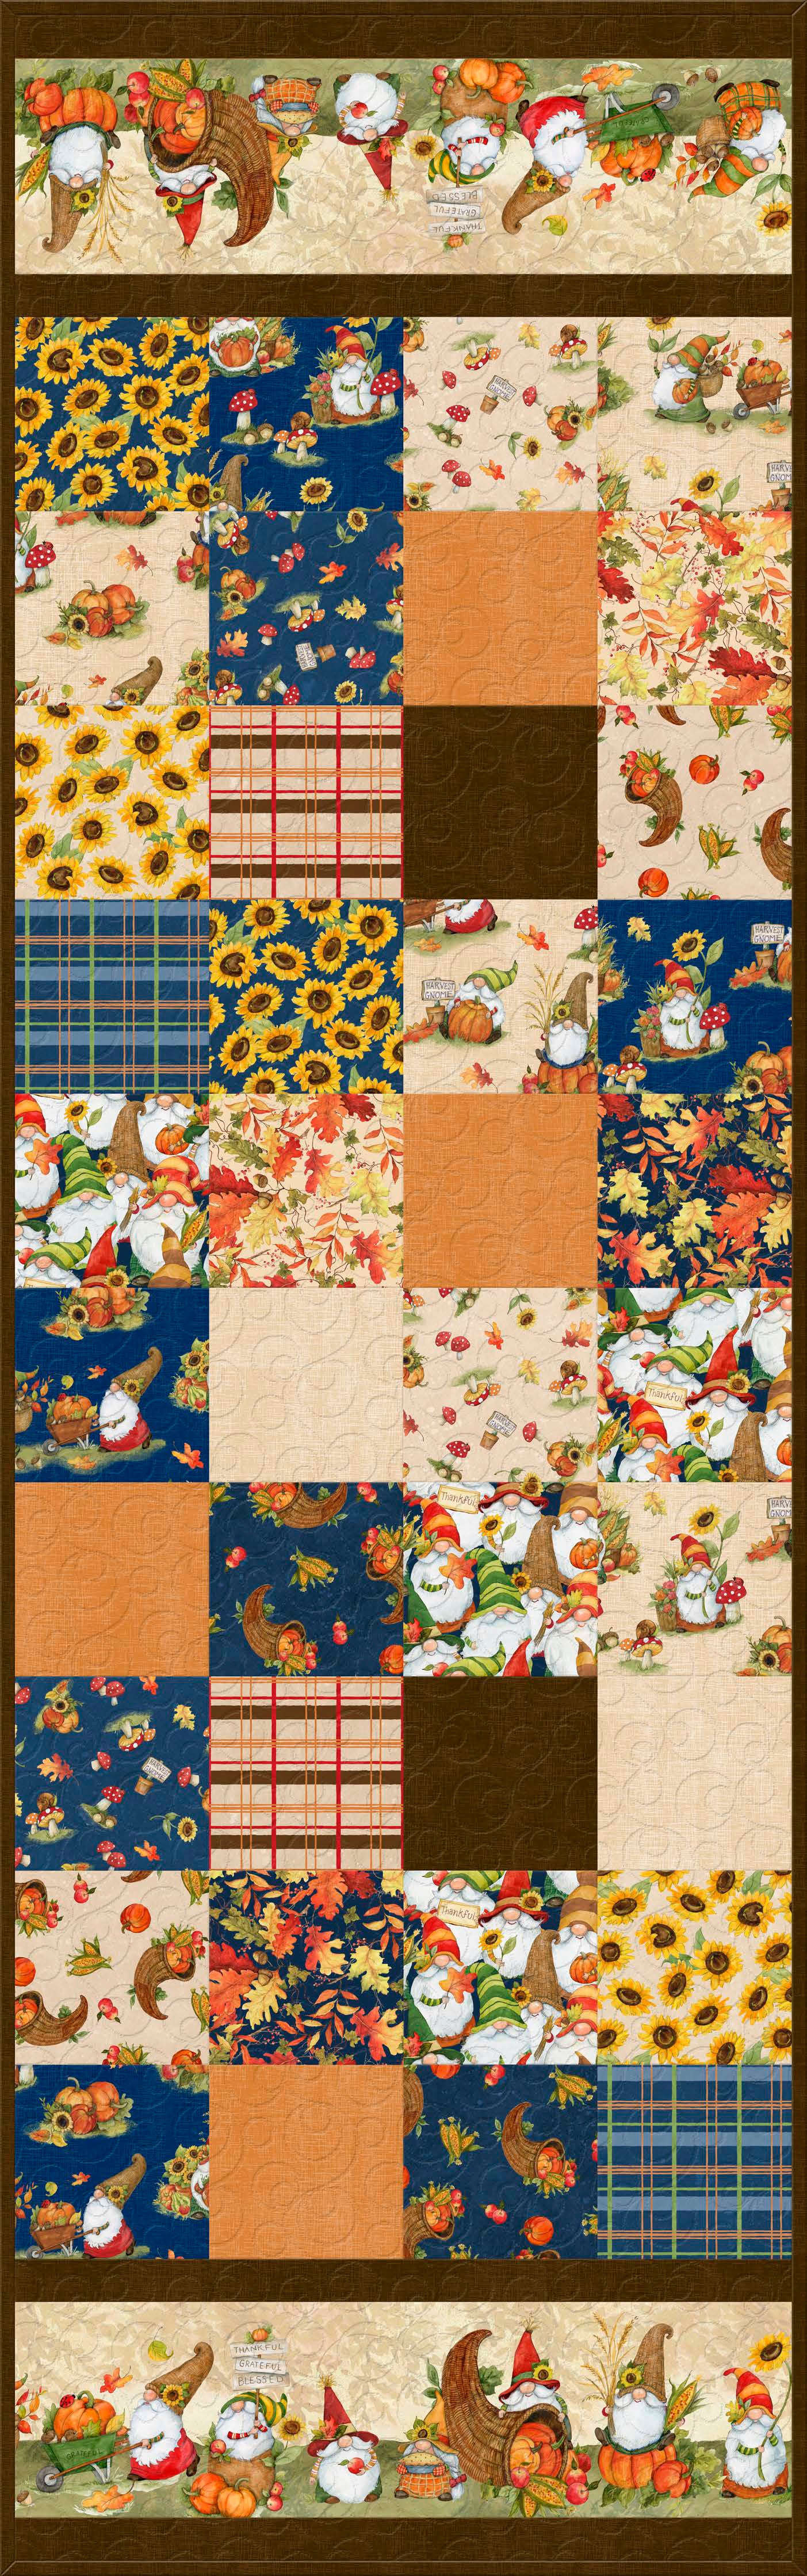 42 5 Inch Squares Gnome-kin Patch Wilmington Prints 100% Cotton Fall Autumn Thanksgiving